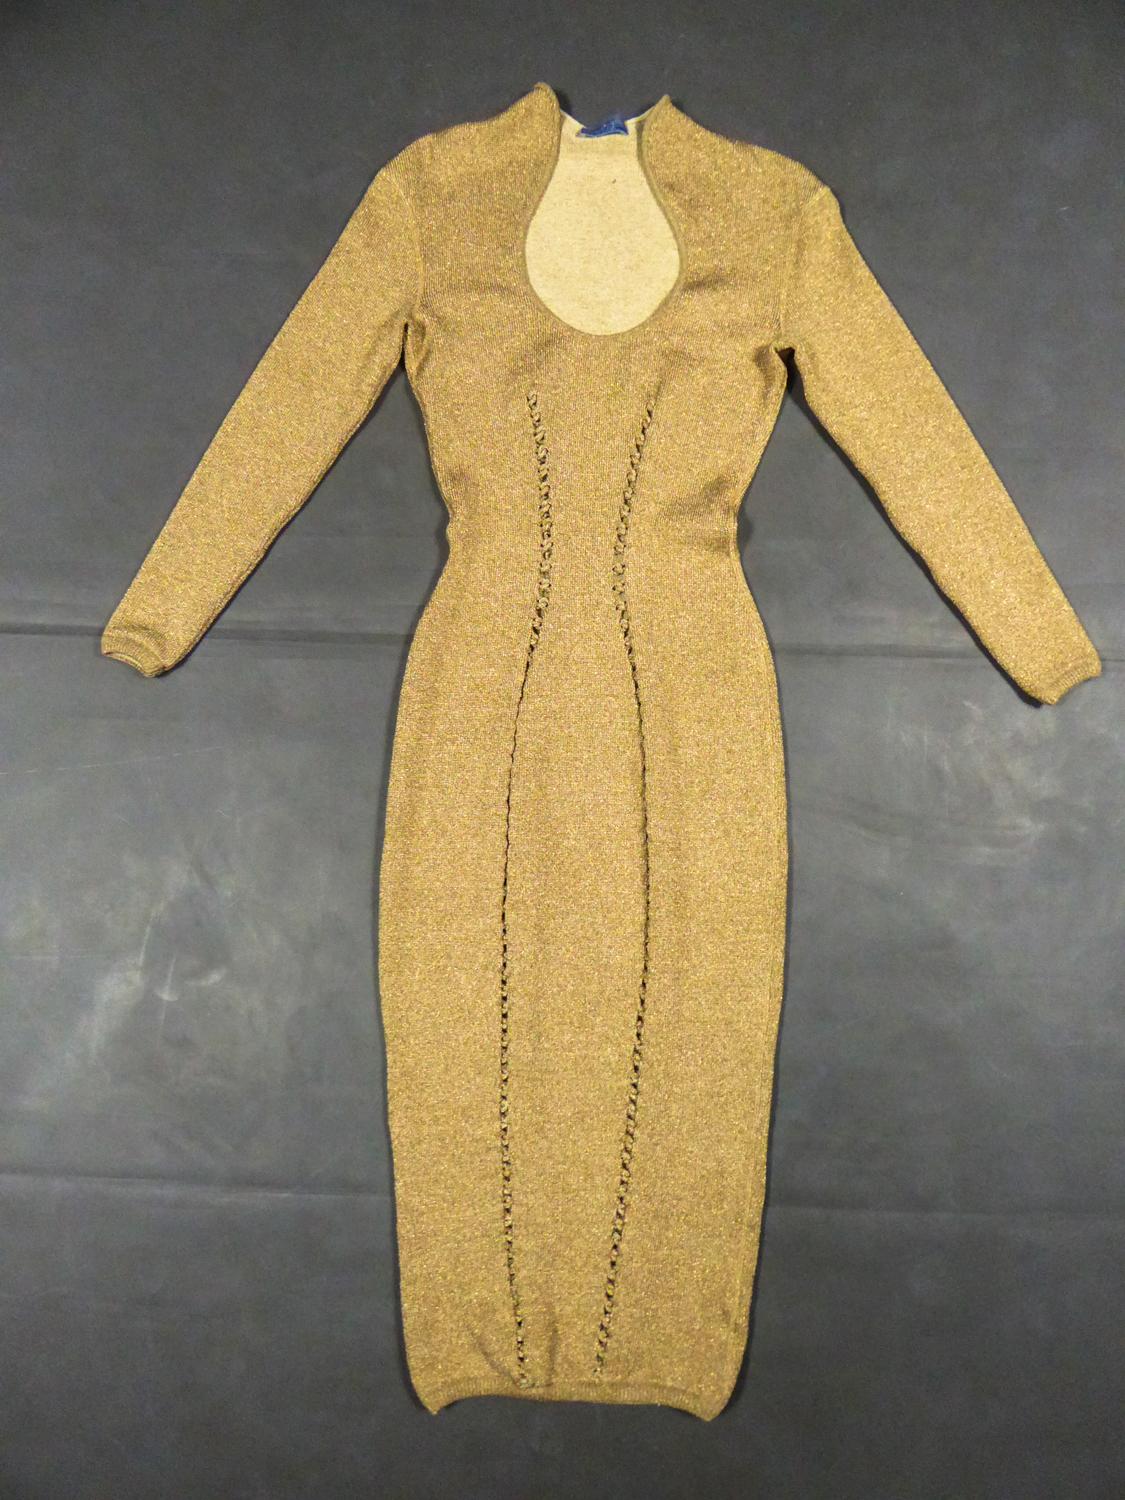 Circa 1990/2000
France

Long evening dress in golden lurex chiné knitwear and stretch cream wool by Thierry Mugler from the years 1990/2000. Stretch and skin-tight dress with plunging neckline, small turn up collar and long sleeves. Interlacing work